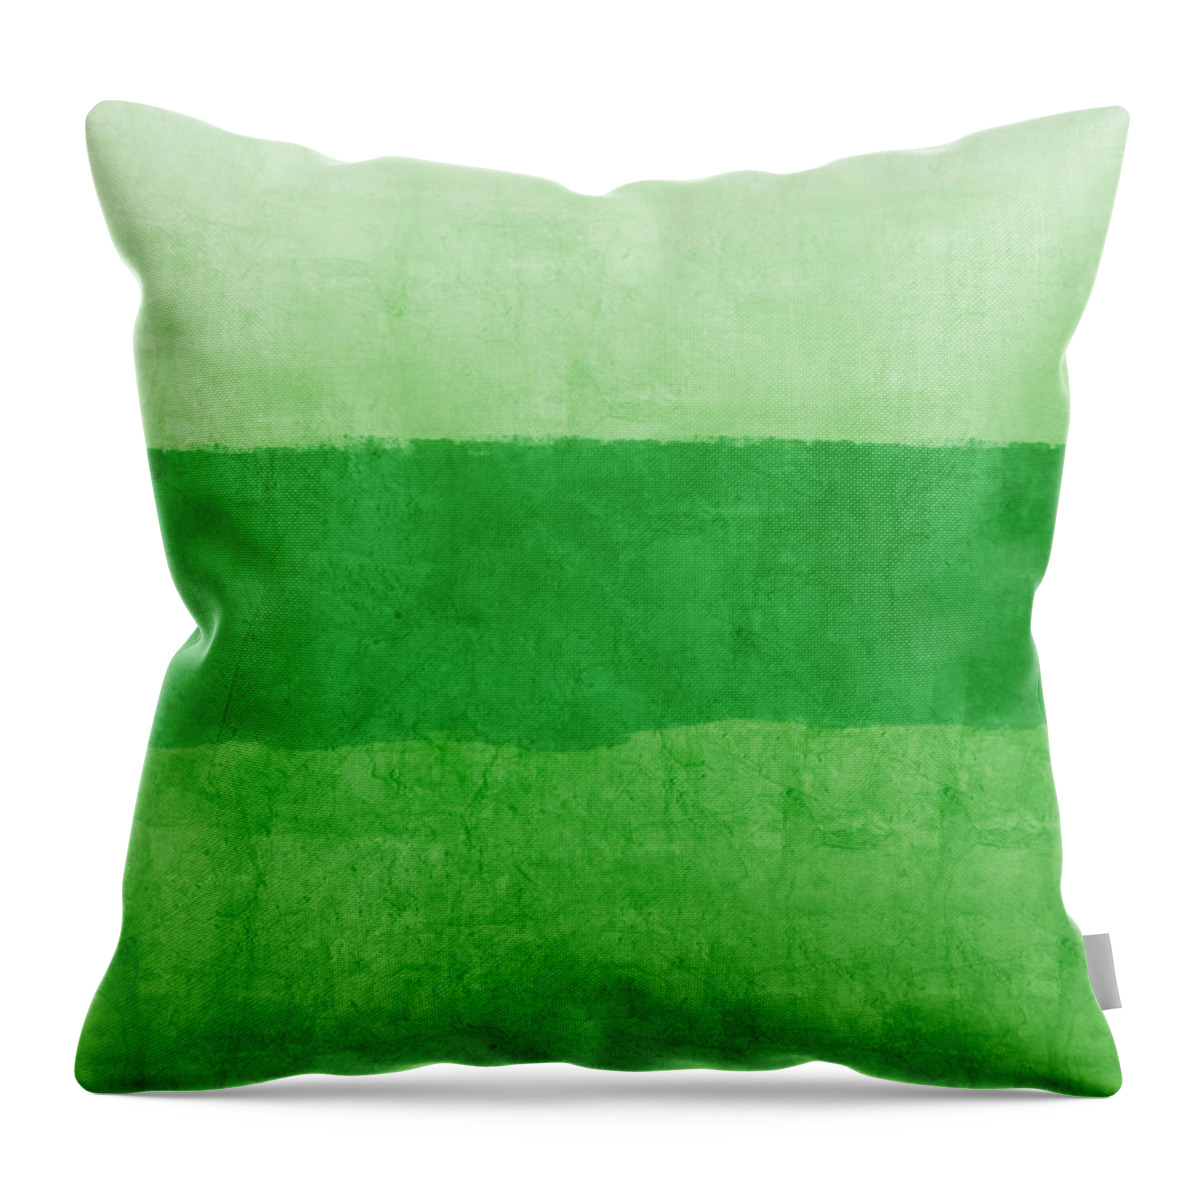 Abstract Landscape Throw Pillow featuring the painting Verde Landscape 2- Art by Linda Woods by Linda Woods